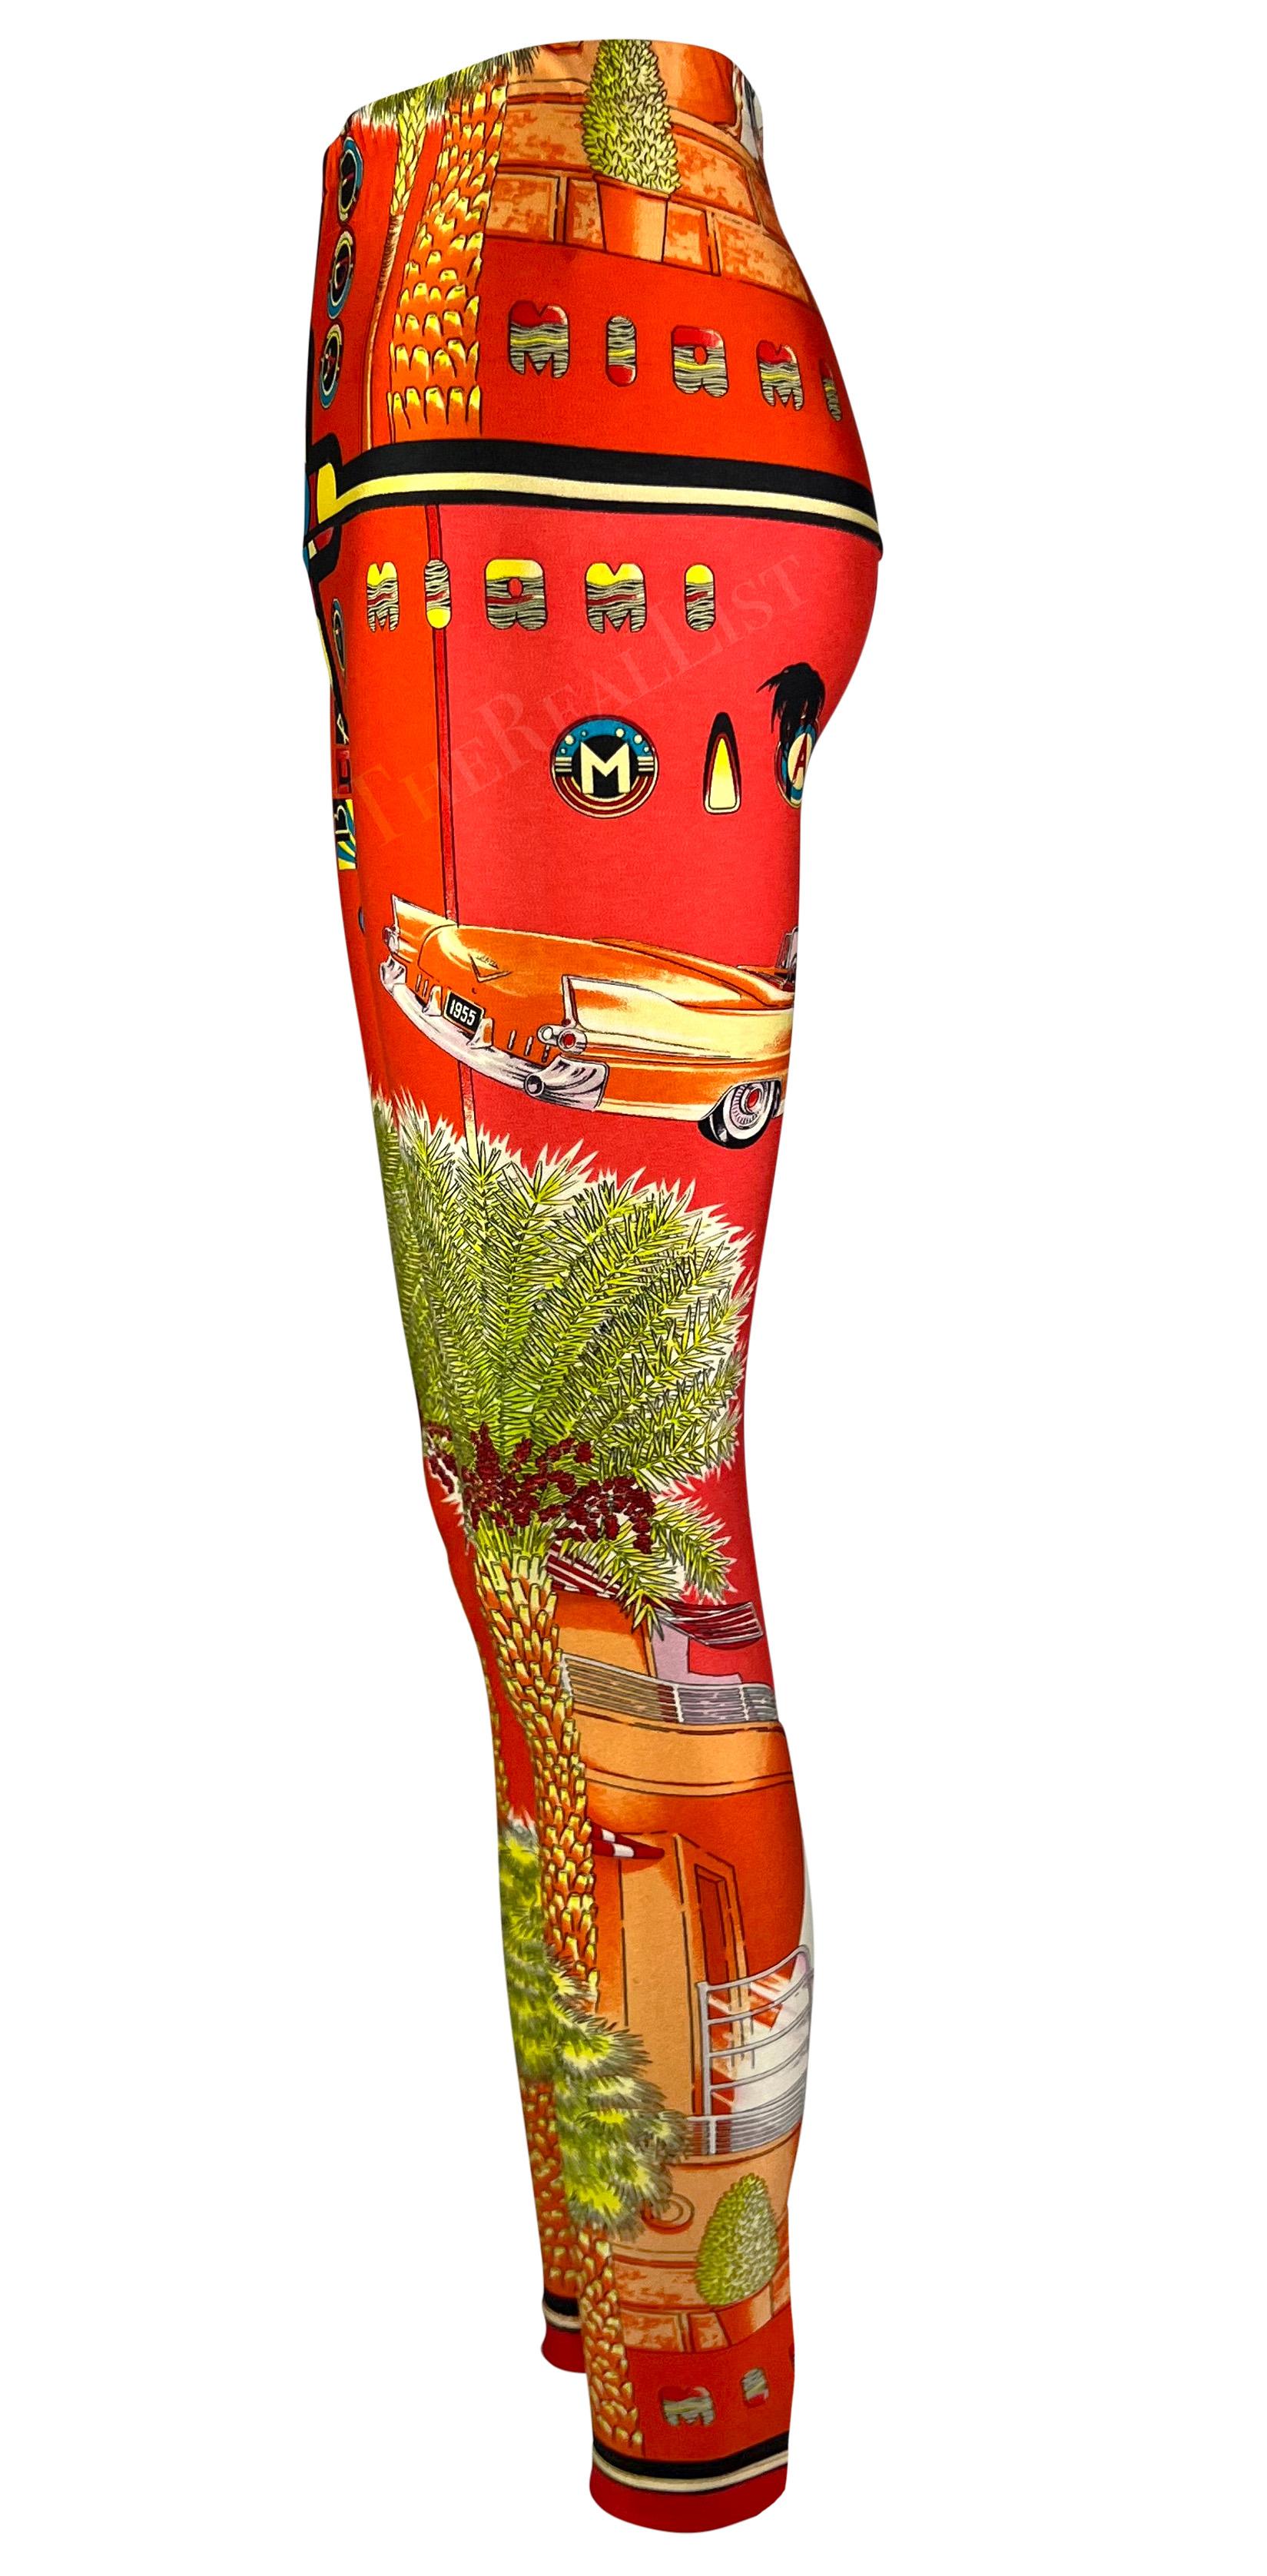 S/S 1993 Gianni Versace South Beach Miami Sunset Orange Red Florida Print Tights For Sale 1